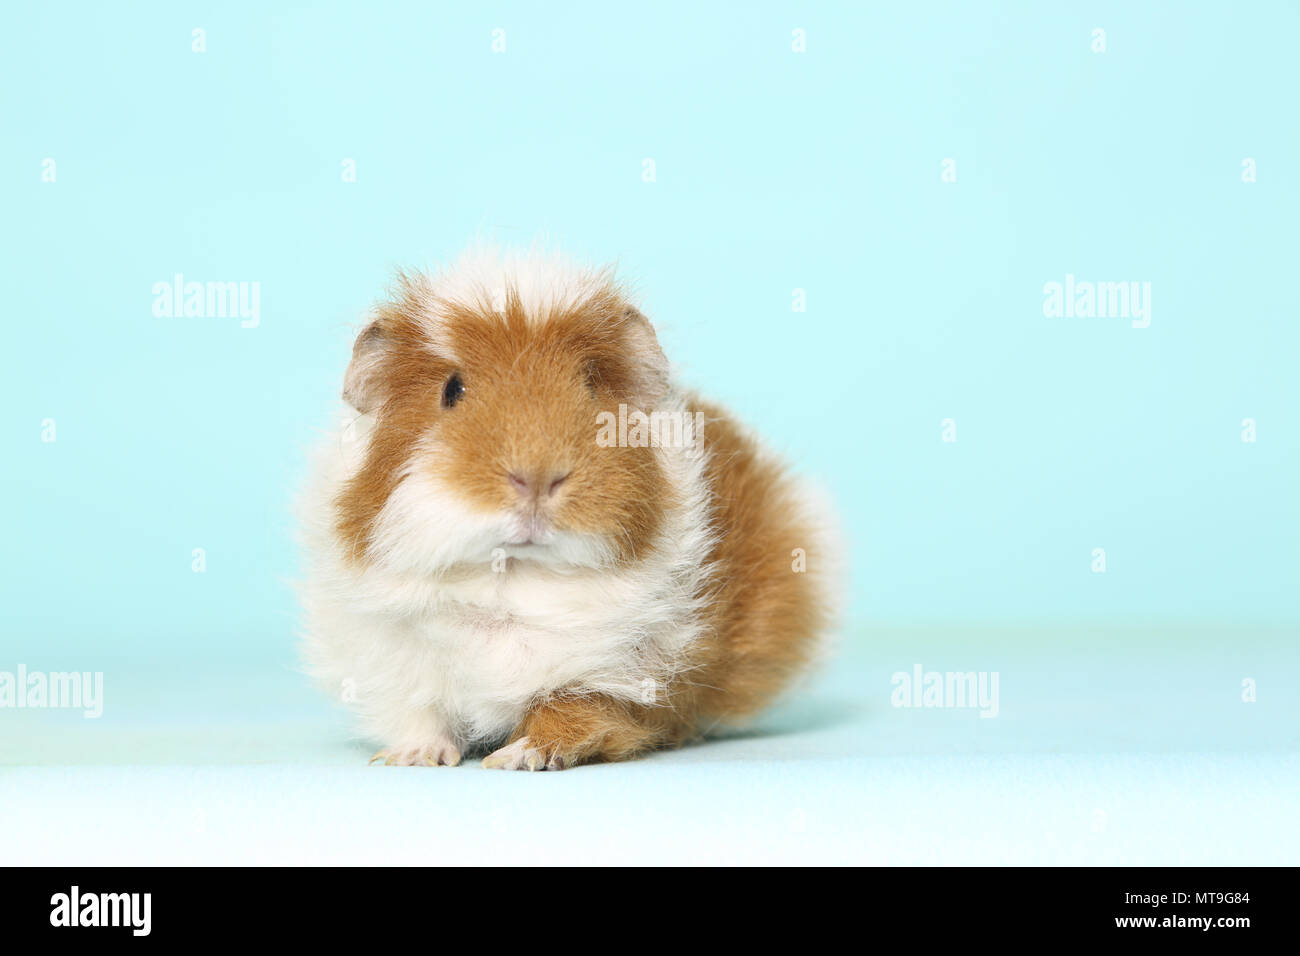 US-Teddy Guinea Pig, seen head-on. Studio picture against a light blue background Stock Photo